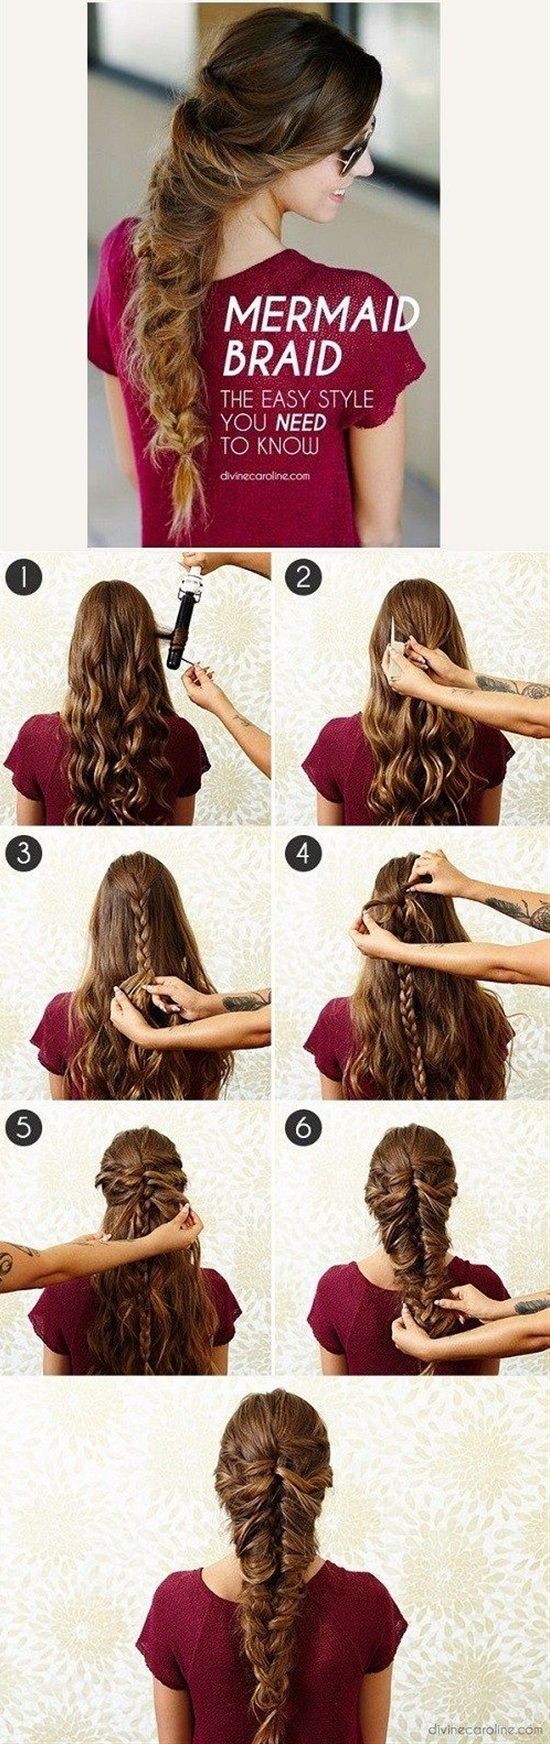 14 Bold & Unique Hairstyle Tutorials You Can Do At Home